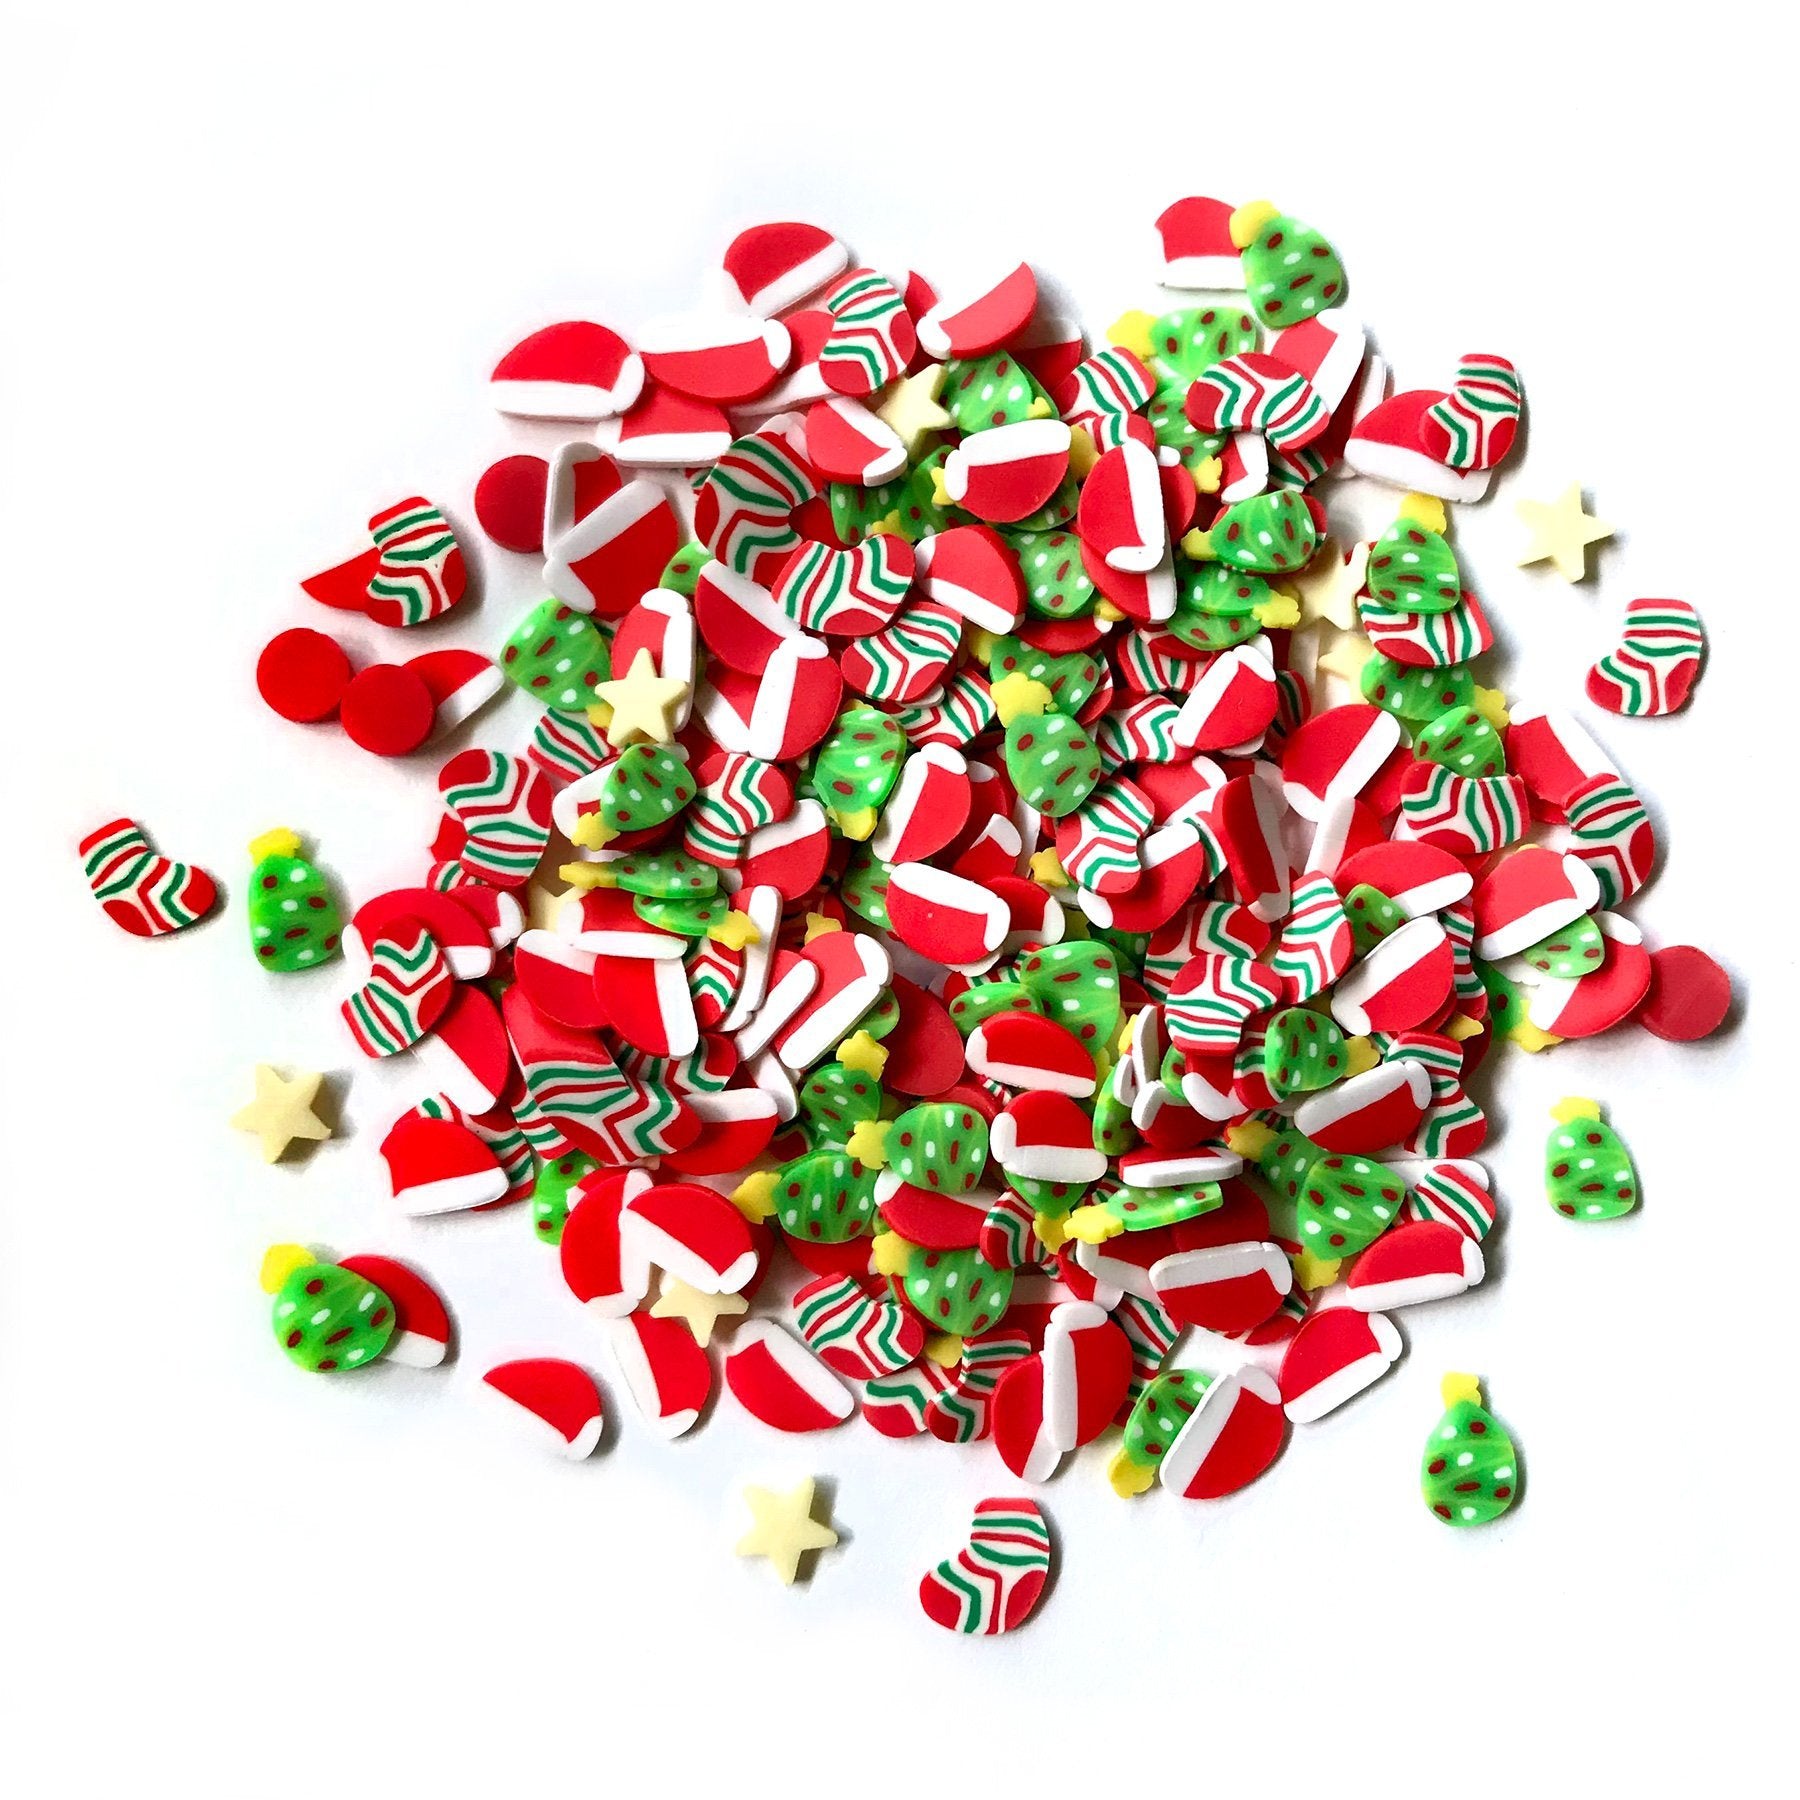 Yuletide Fun - Buttons Galore and More